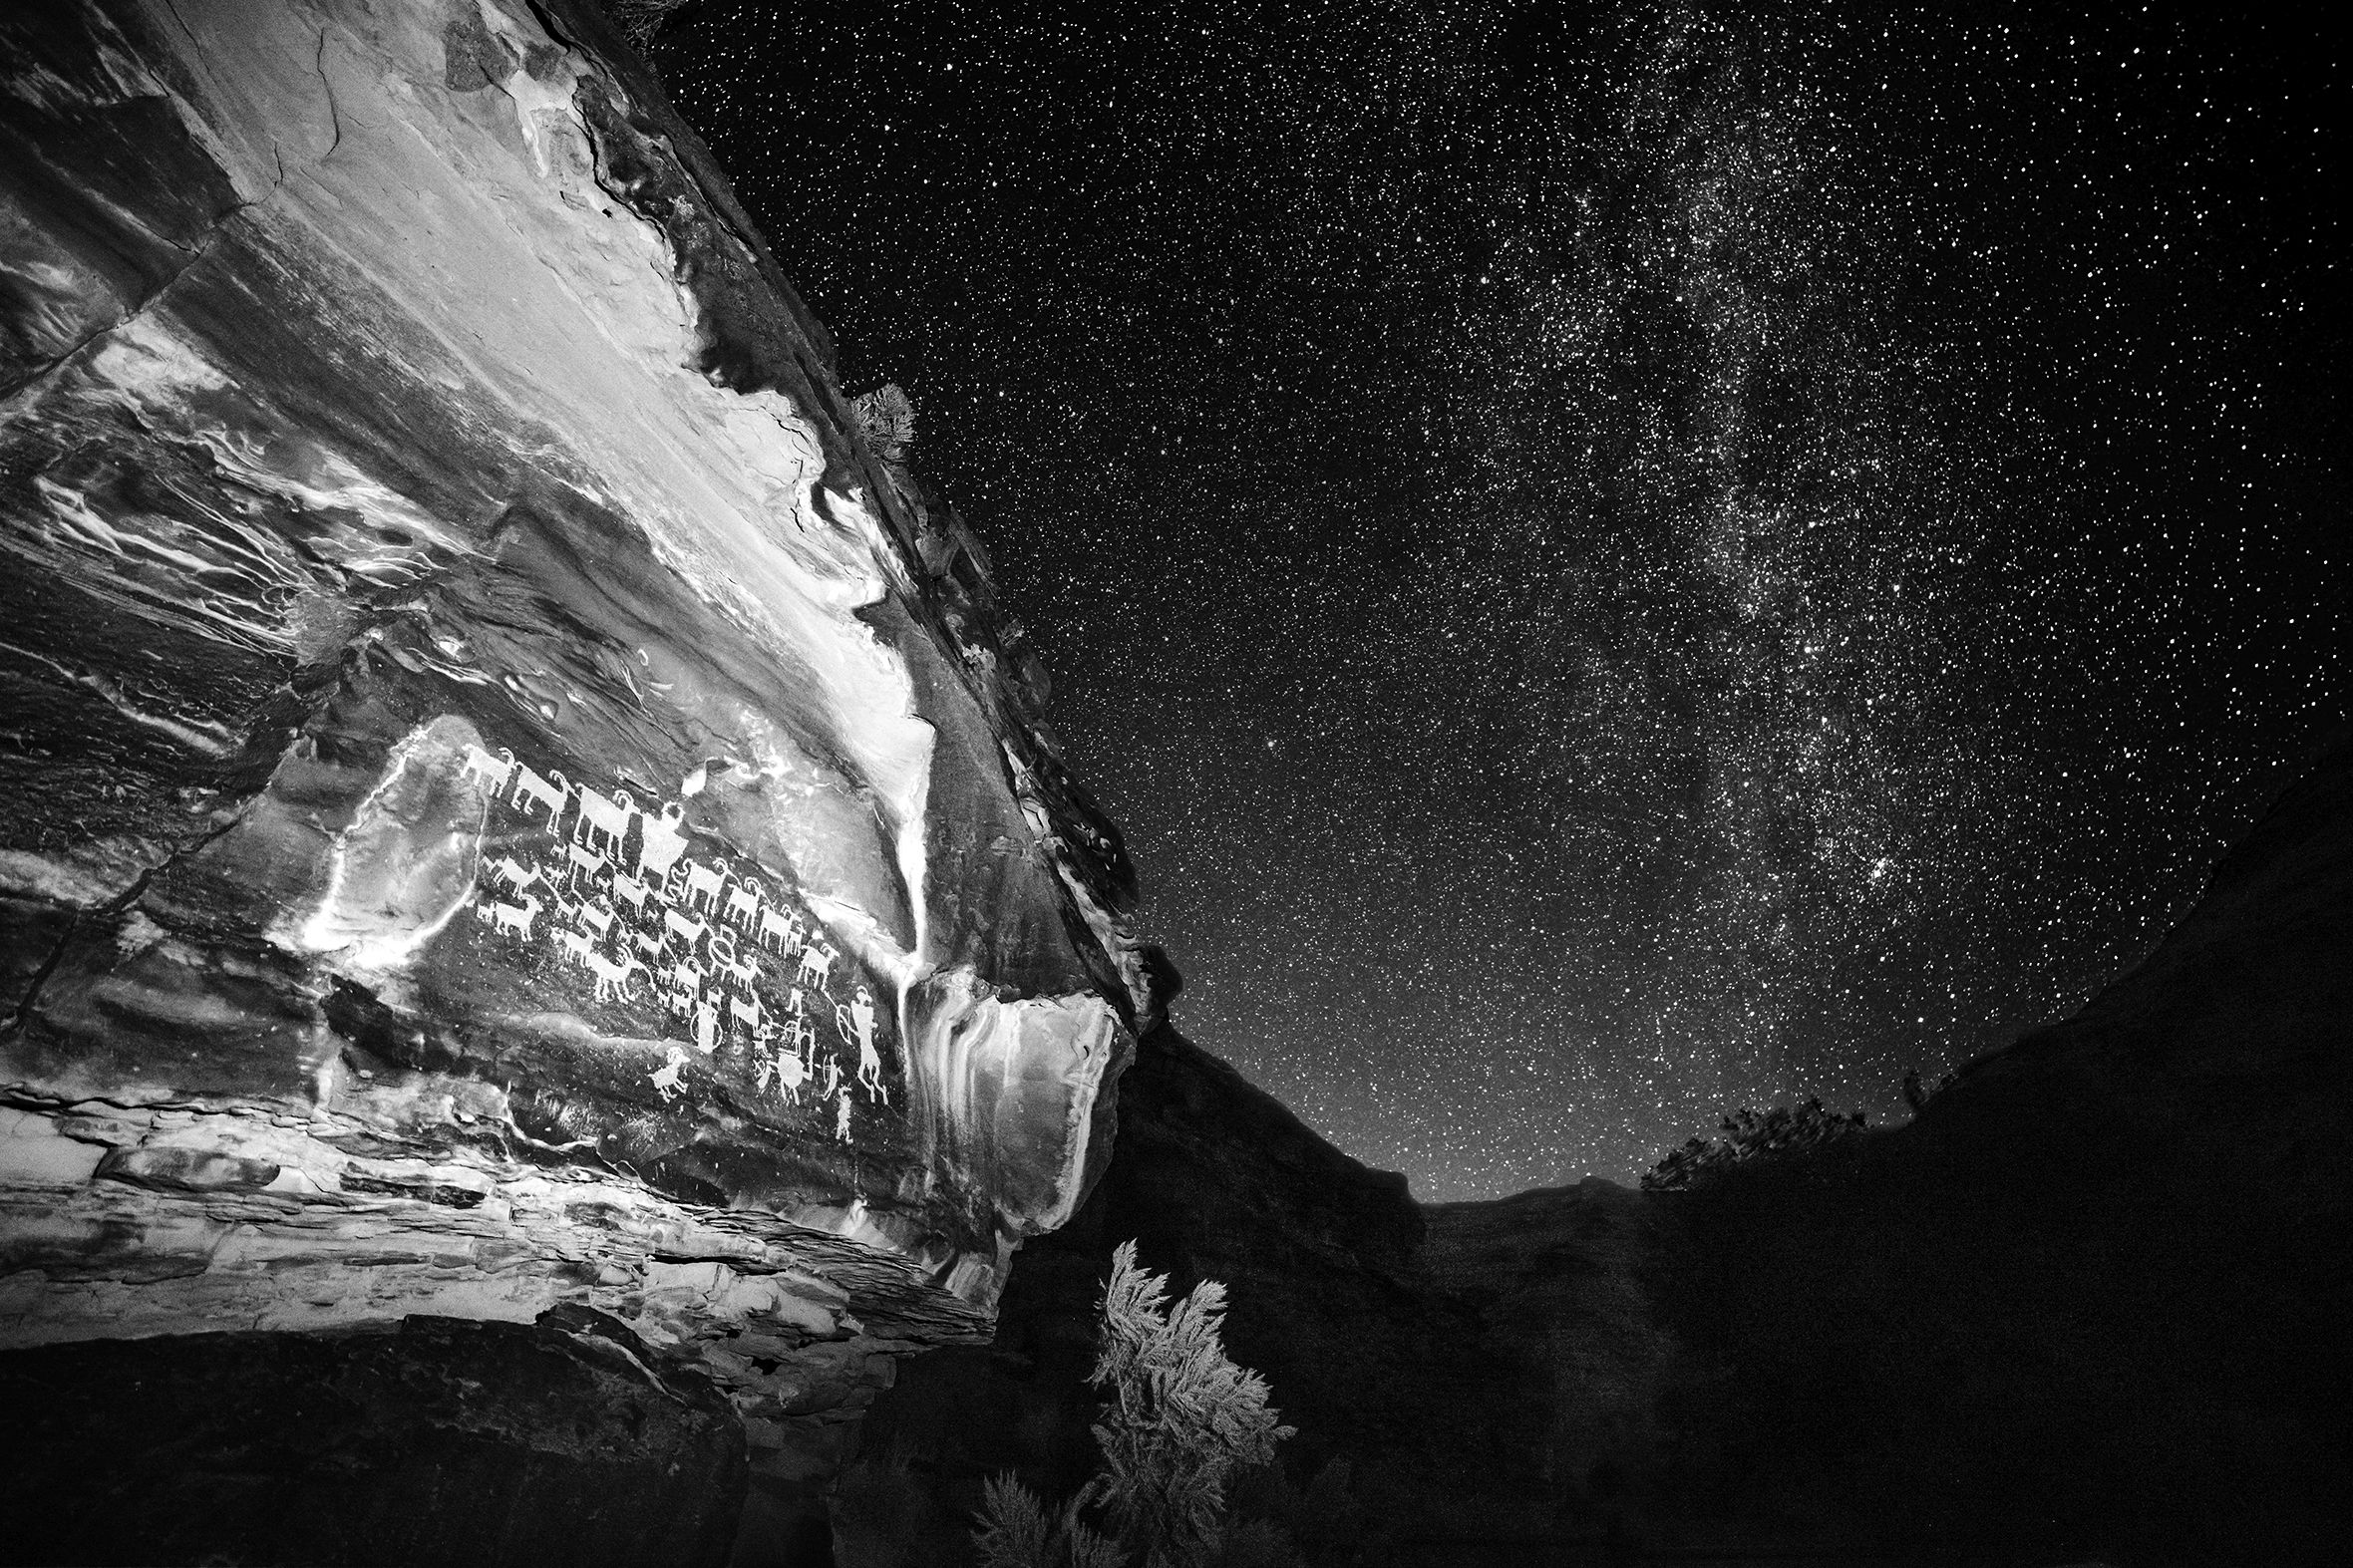 The photo titled “Ancient Nights: Night Hunt” shows Anasazi petroglyphs on the side of a cliff in the foreground against a starry night sky. The petroglyphs are of hunters with bows and arrows surrounded by a herd of large animals.